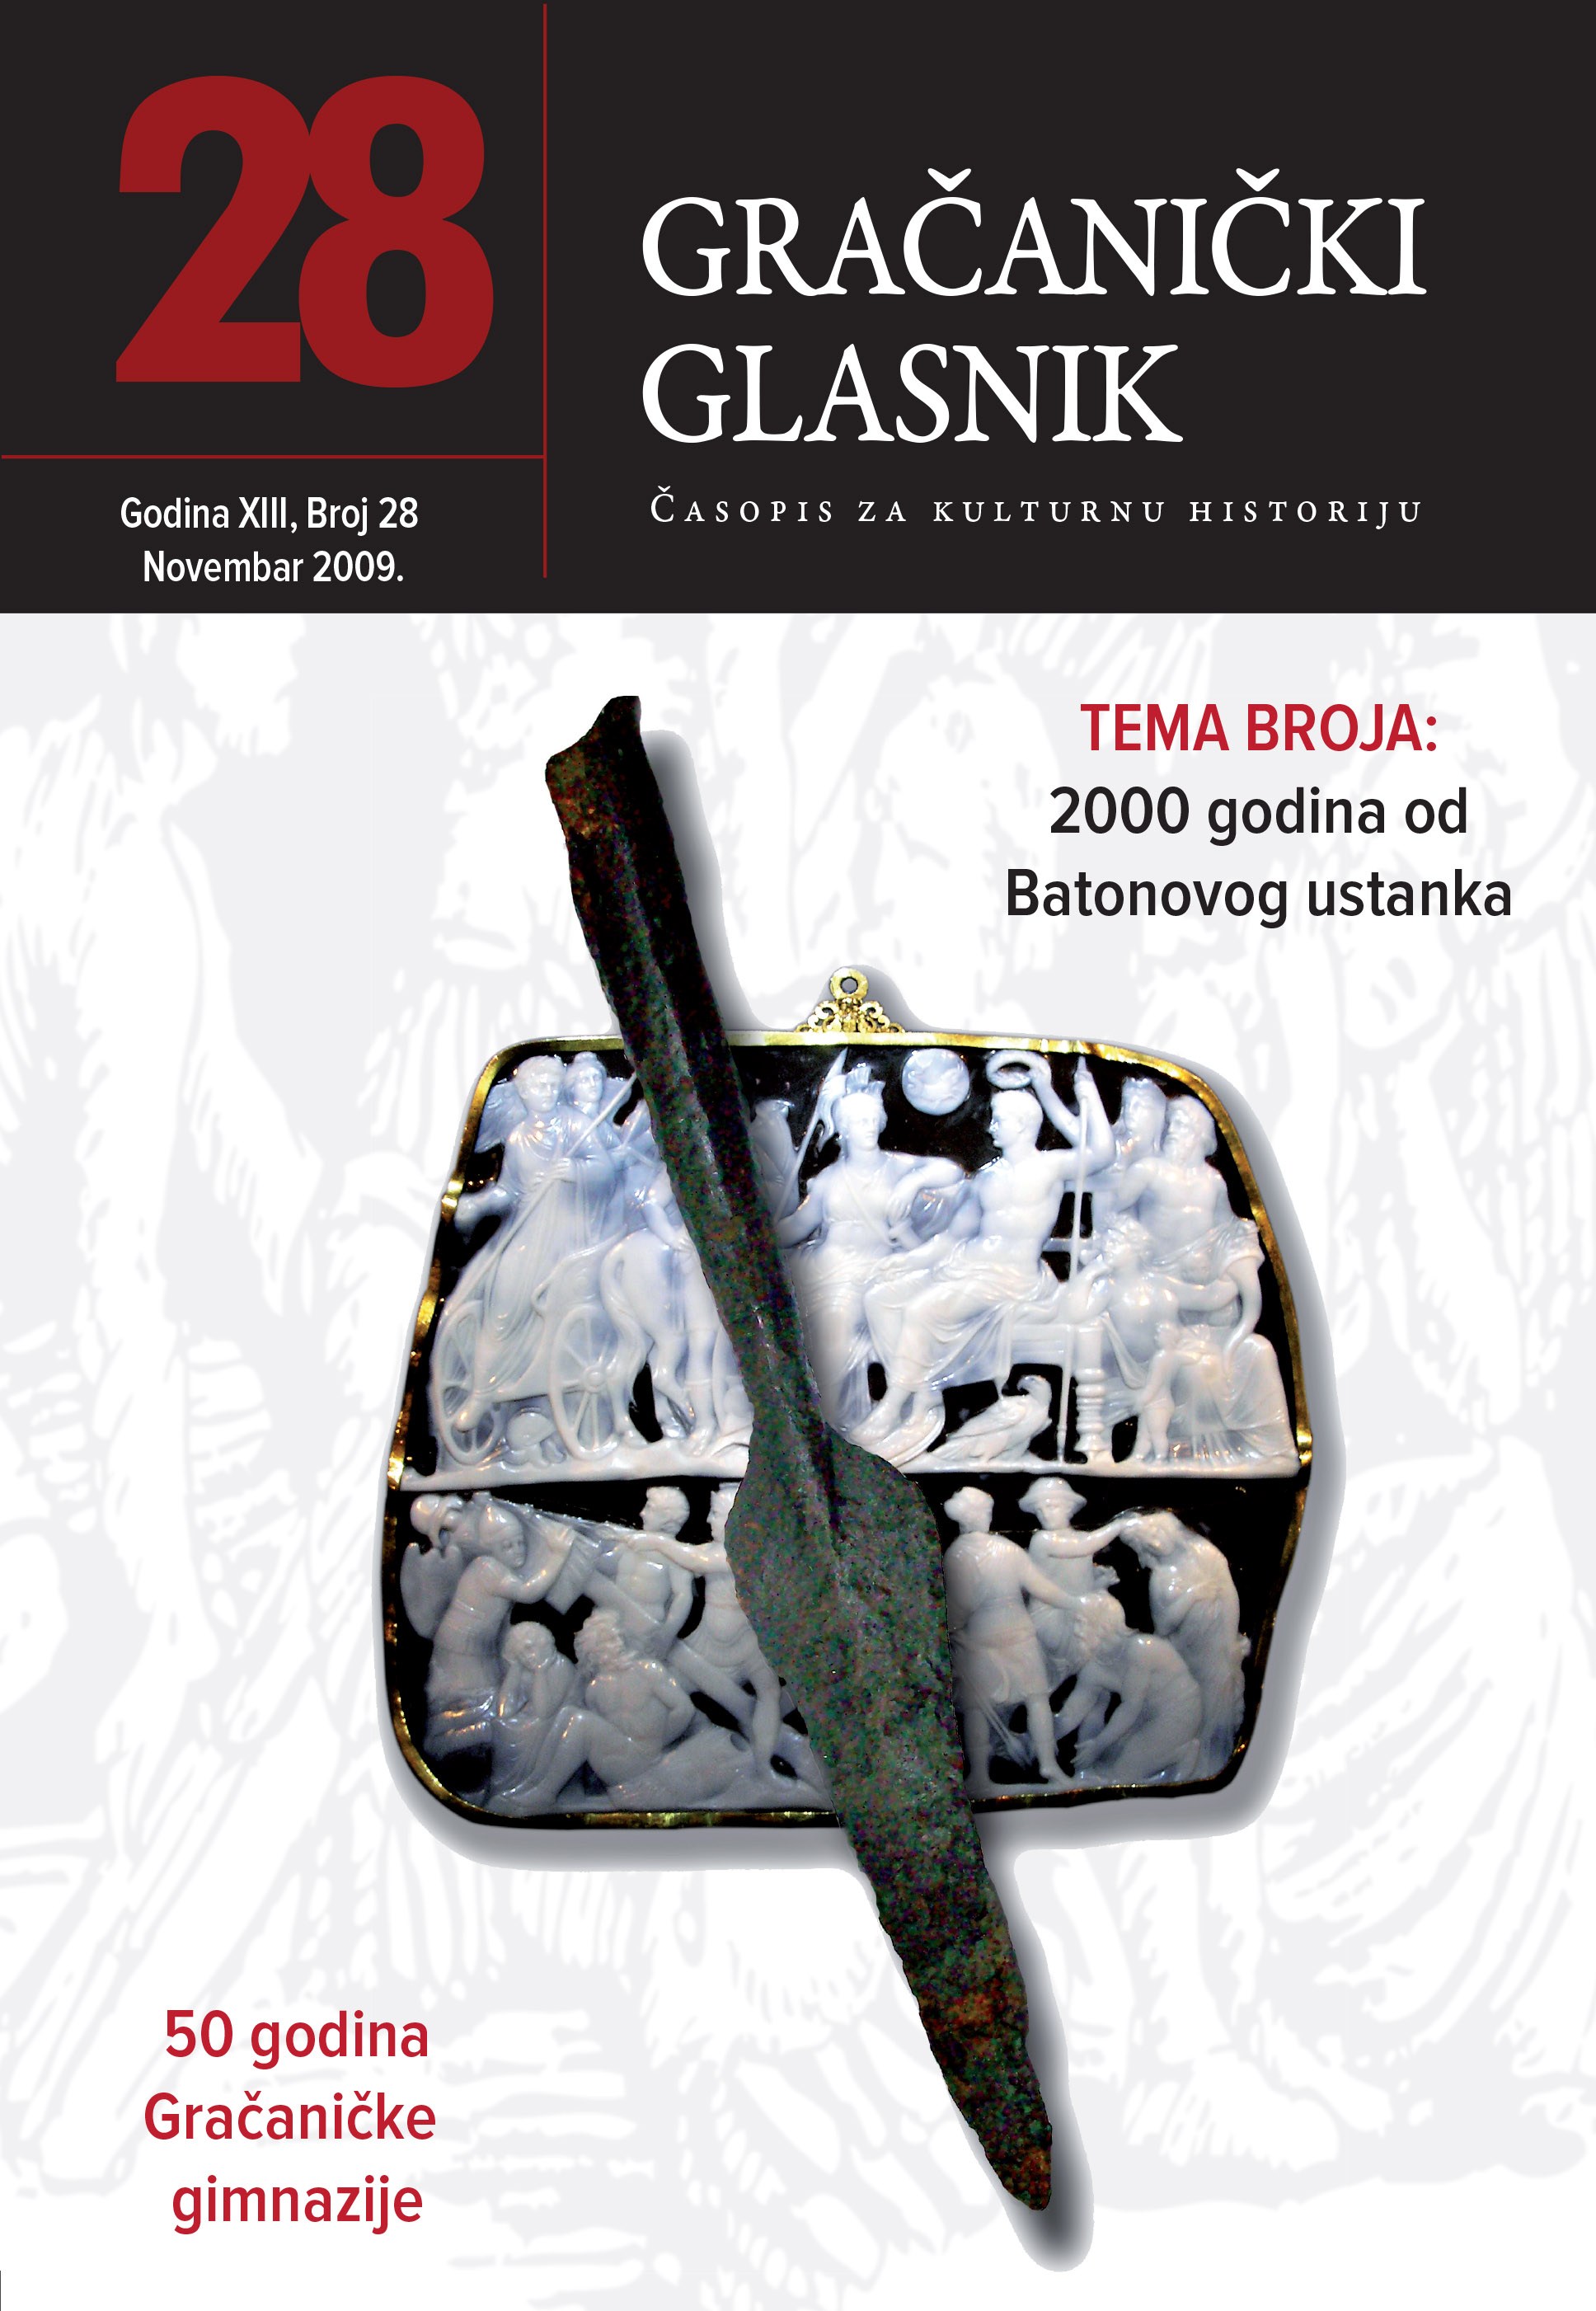 Some of the opinions on the occasion of golden jubilee of Gymnasium of Gračanica Cover Image